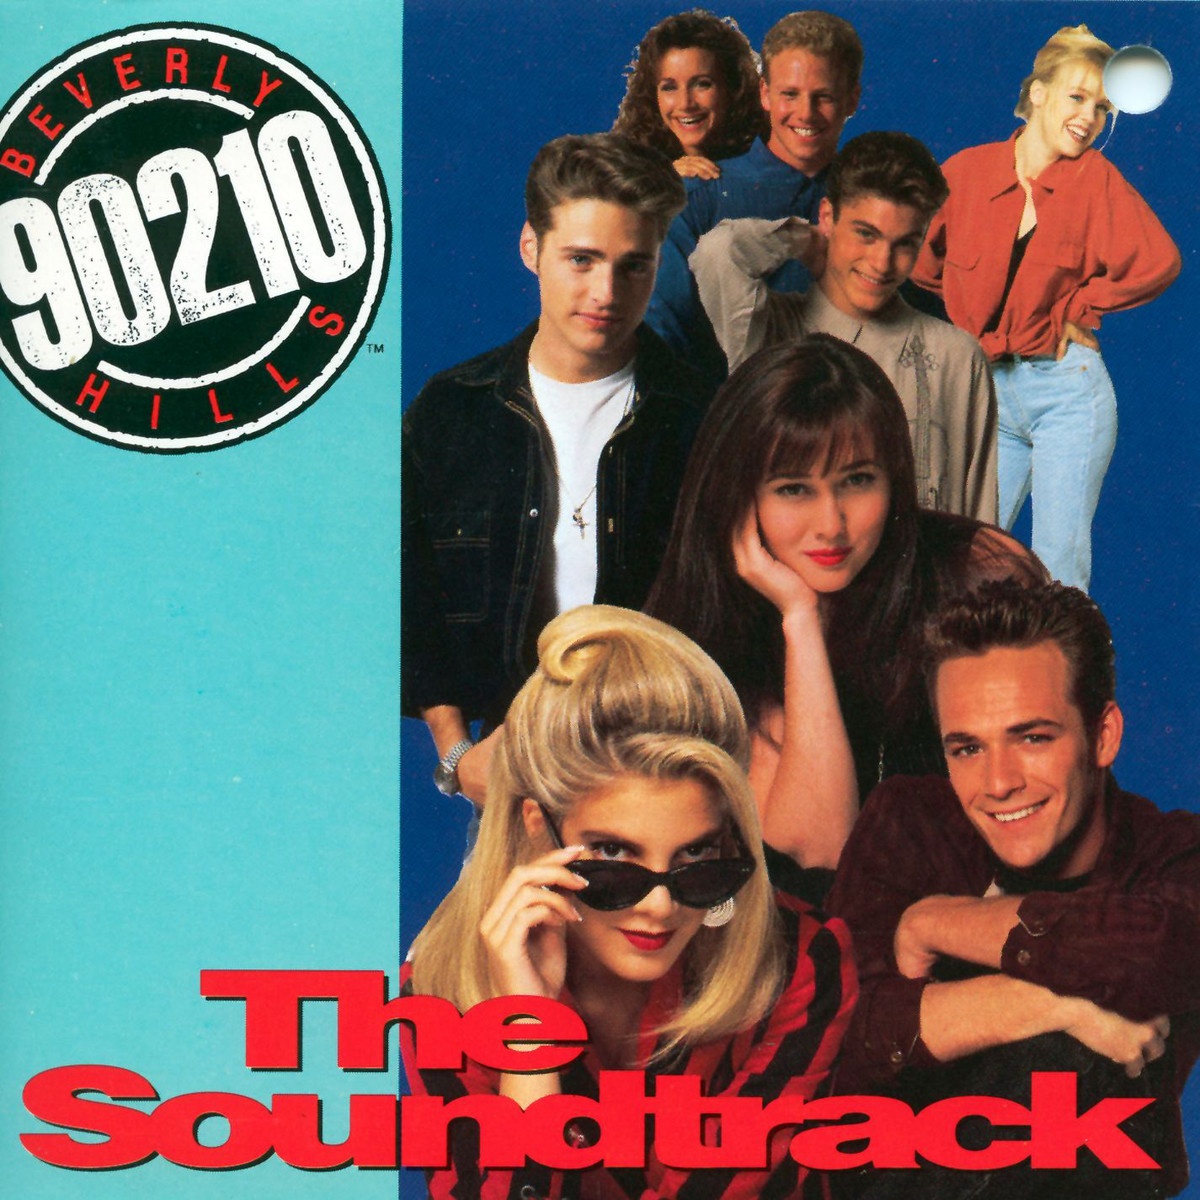 Beverly Hills 90210 (The Soundtrack)